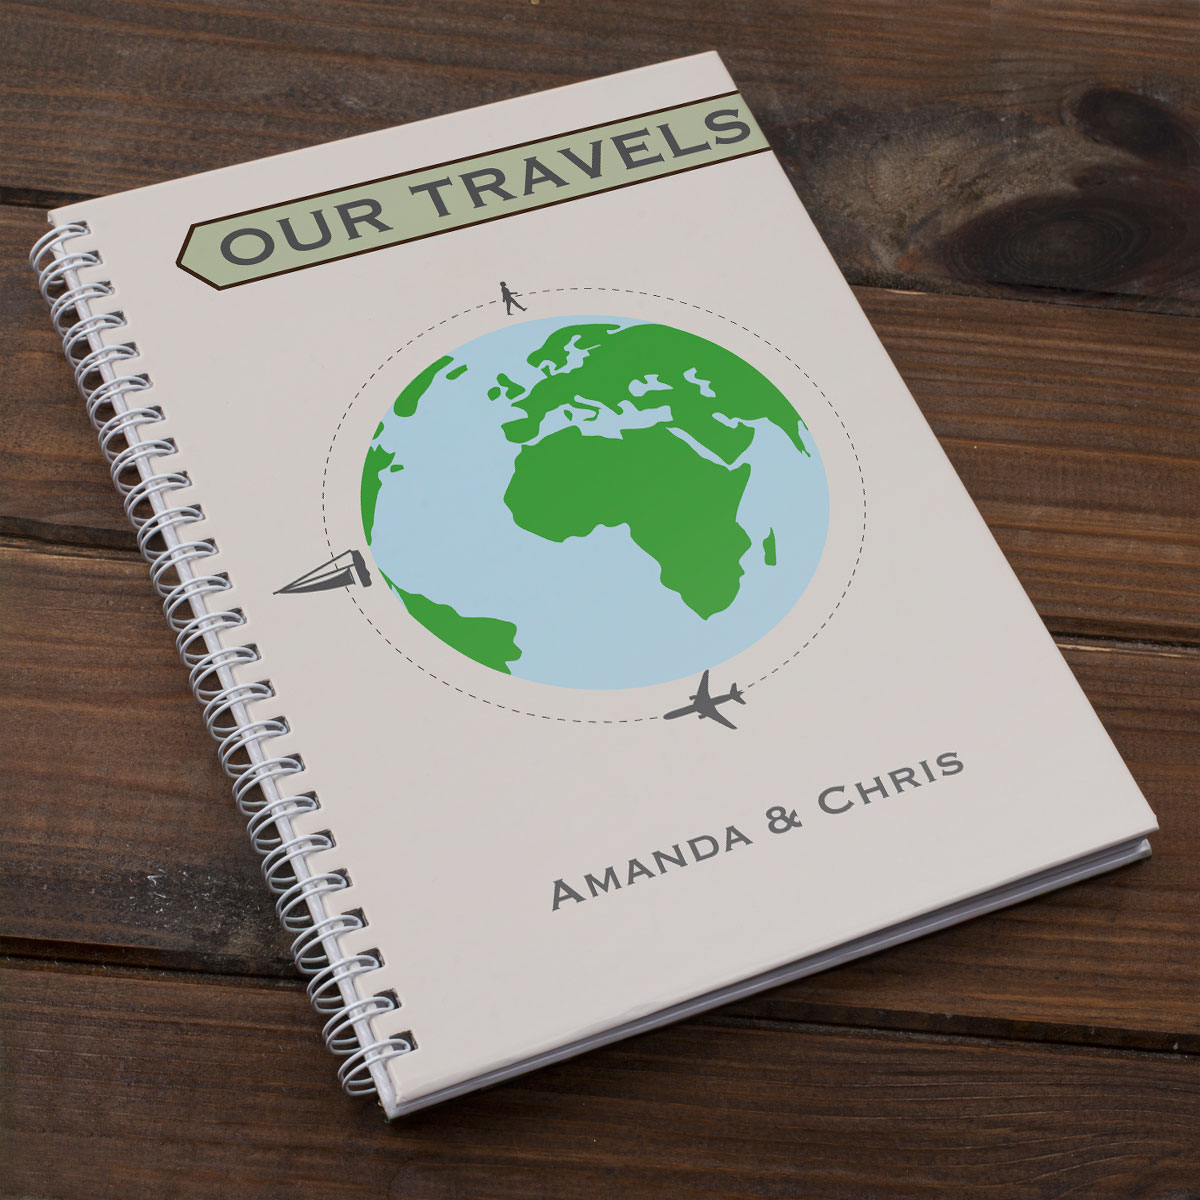 Personalised Notebook - Our Travels